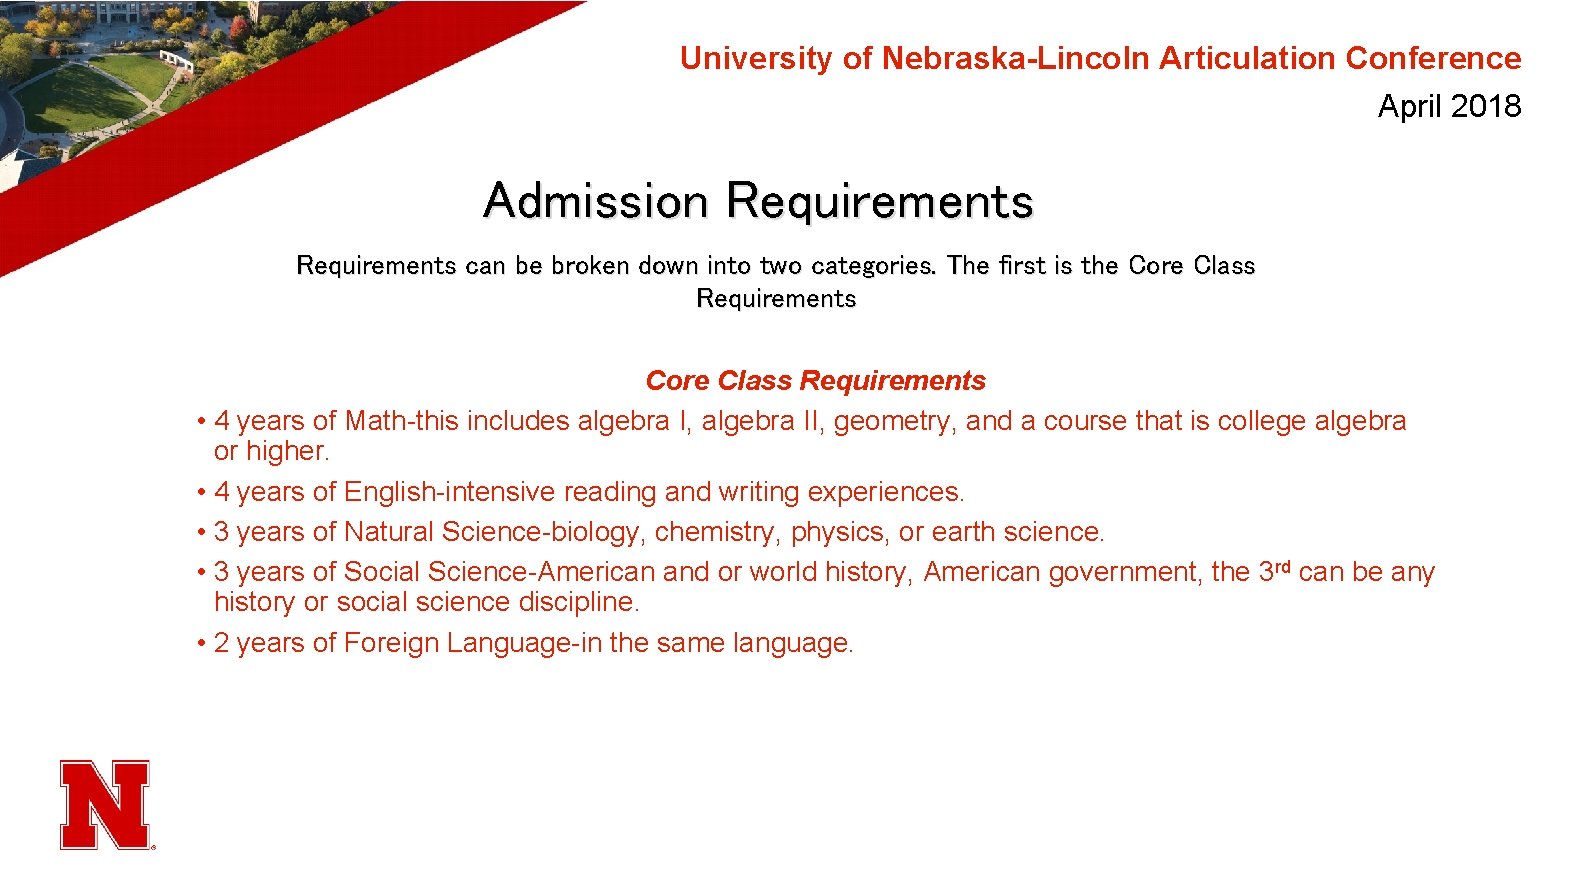 University of Nebraska-Lincoln Articulation Conference April 2018 Admission Requirements can be broken down into